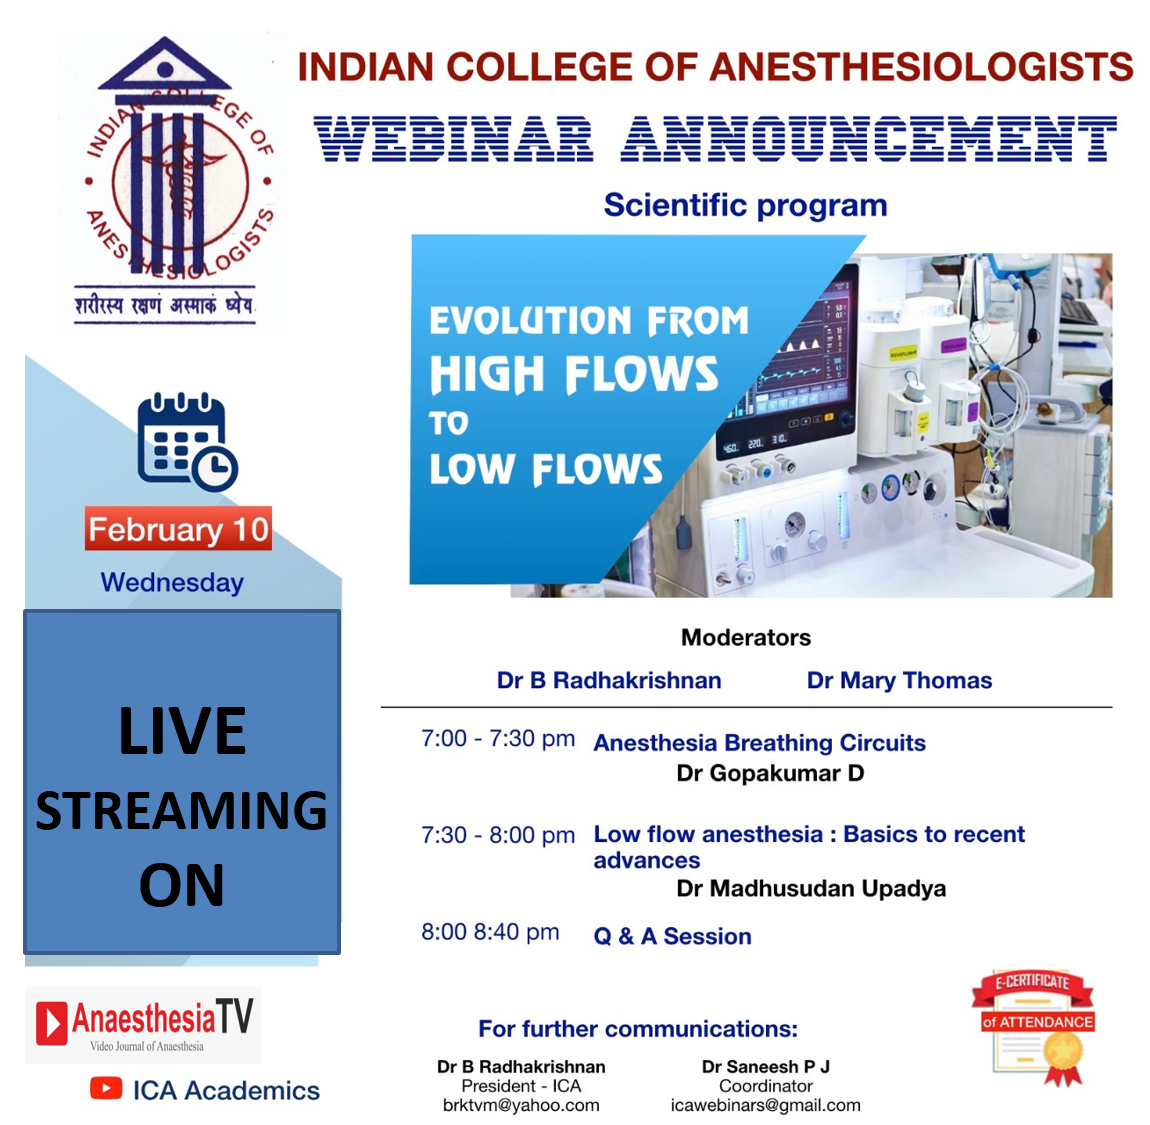 INDIAN COLLEGE OF ANESTHESIOLOGISTS ( ICA ) Present’s Scientific Program On EVOLUATION FROM HIGH FLOWS TO LOW FLOWS